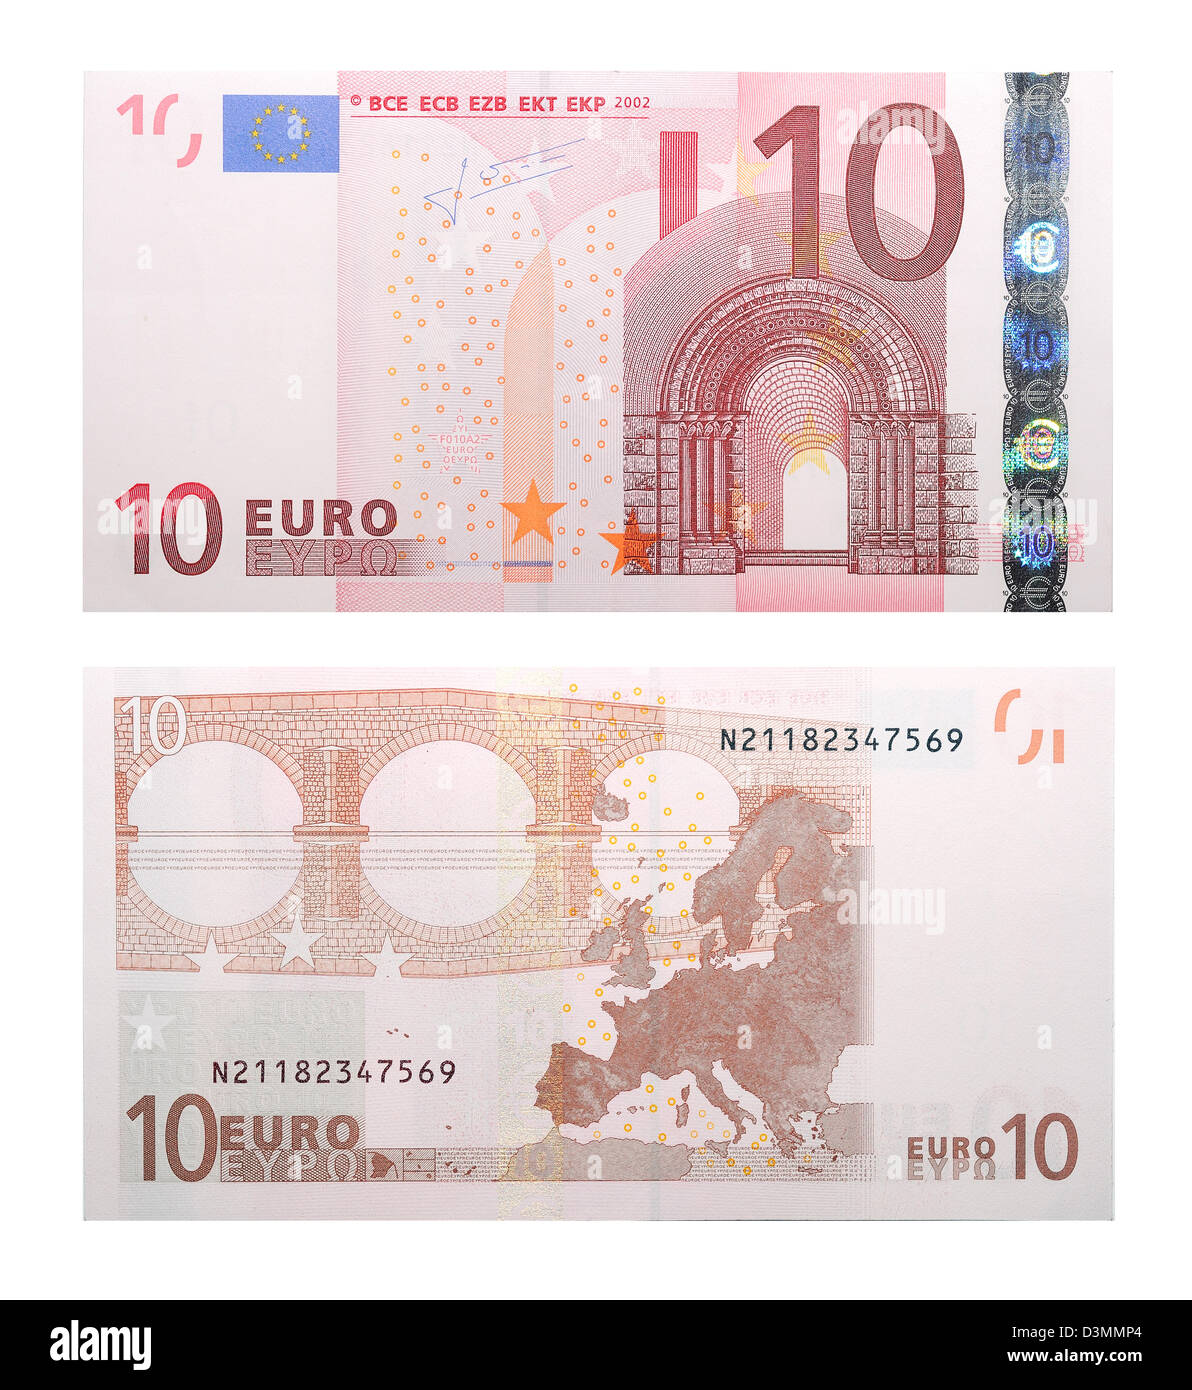 EUROPEAN 10 EURO BANK NOTE 2014 REAL CURRENCY for use in Europe EU